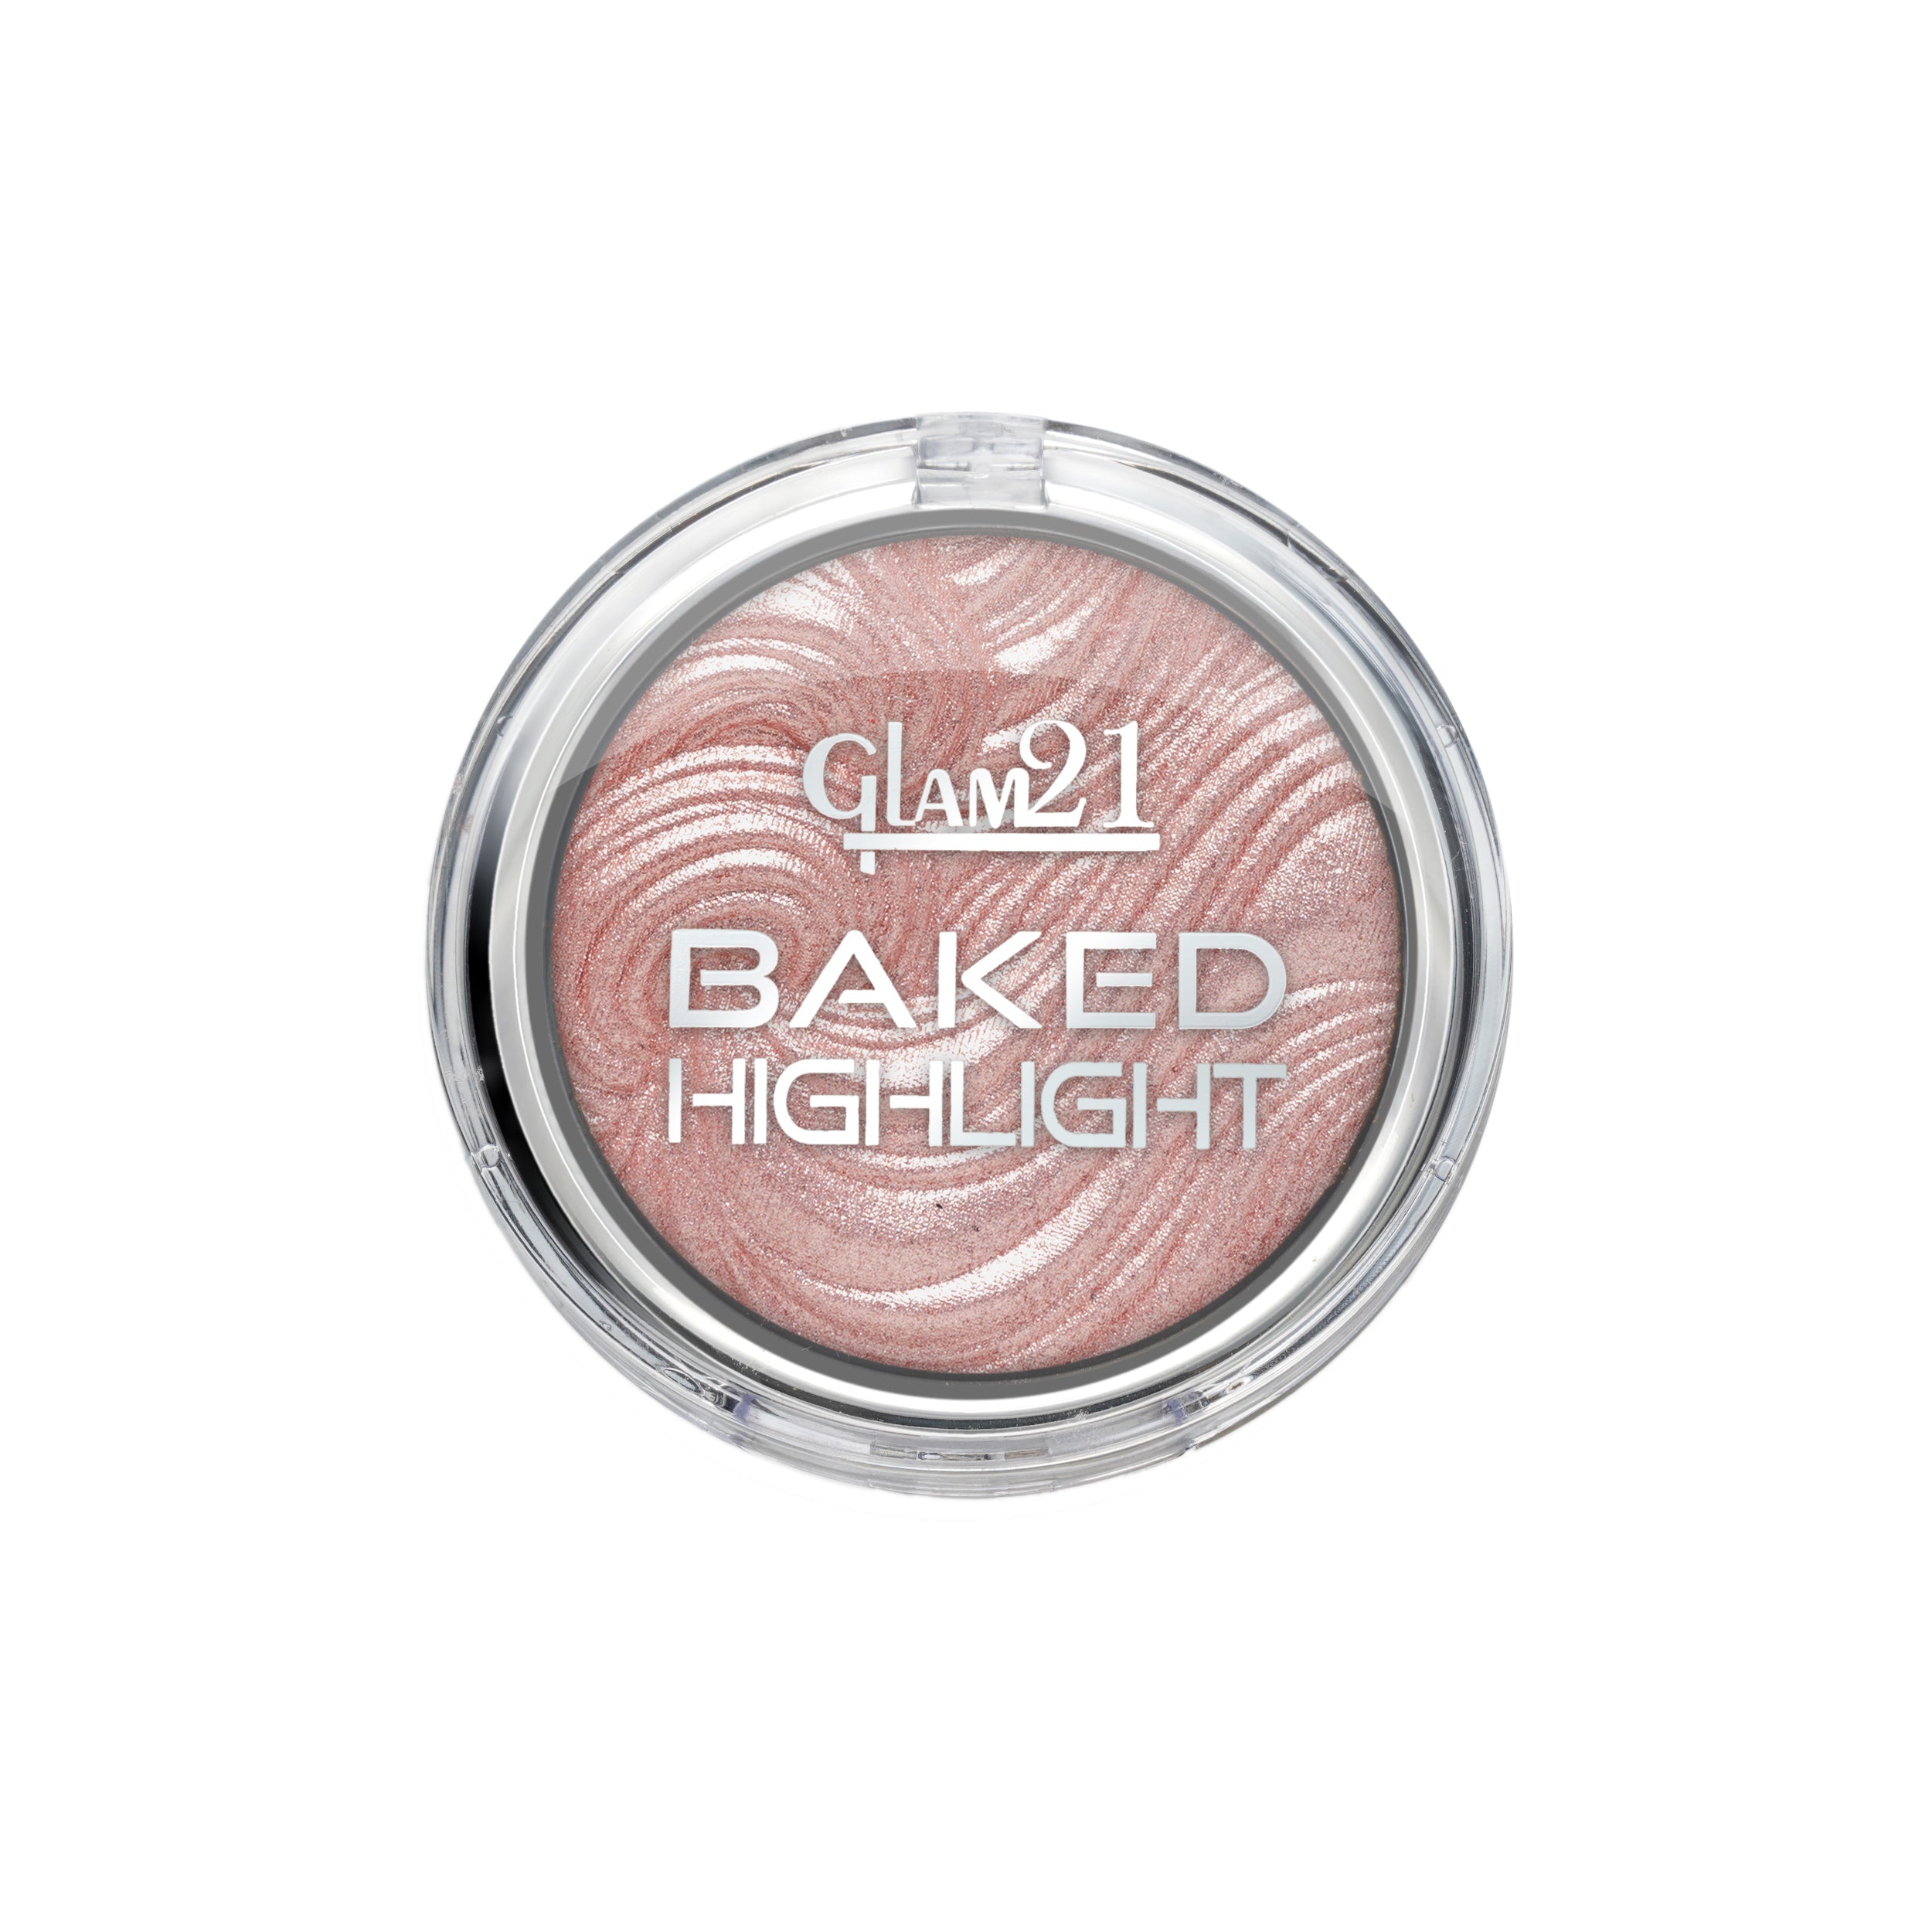 Glam21 Baked Highlighter with Silky Pigments Shimmer Look & Longlasting Mettalic Finish Highlighter, 2.8 g (Shade-02)